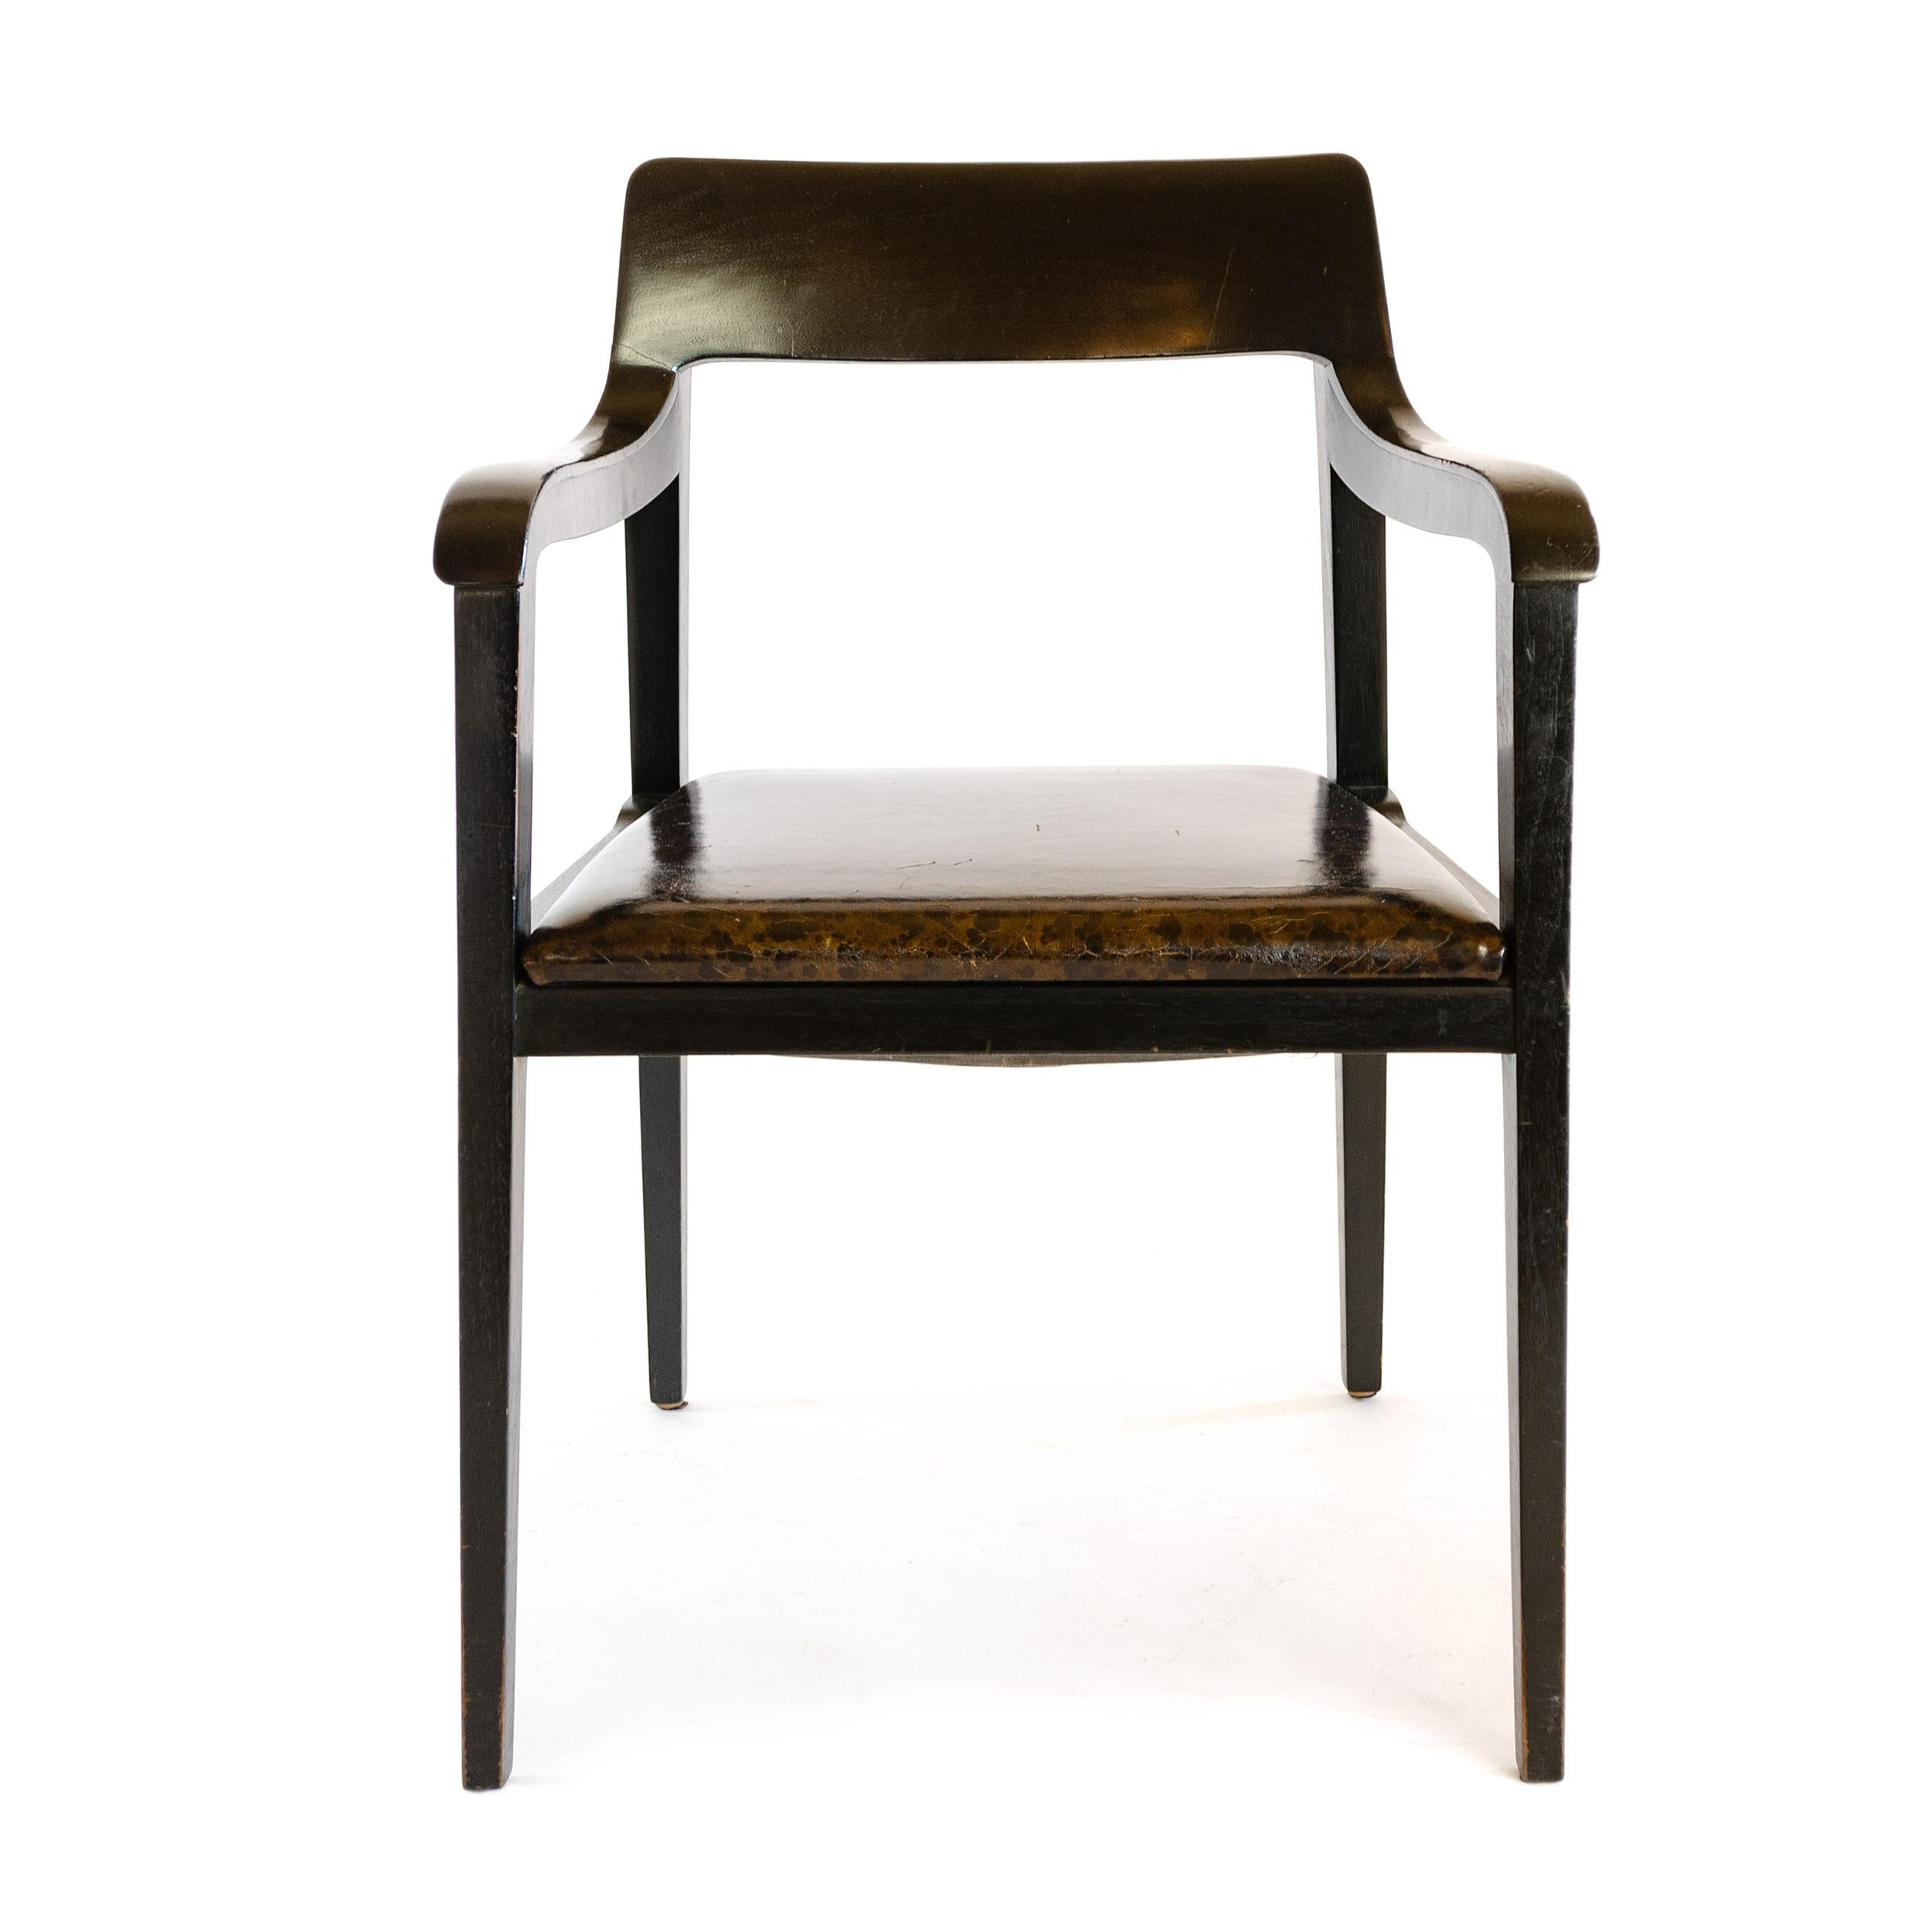 Truly timeless, Professor Richard Reimerschmid’s Dresden arm chair remains as crisp and current today as it was in 1899 when it was designed for the 1899 Dresden Exposition. It’s easy to understand why Edward Wormley held it in such deep